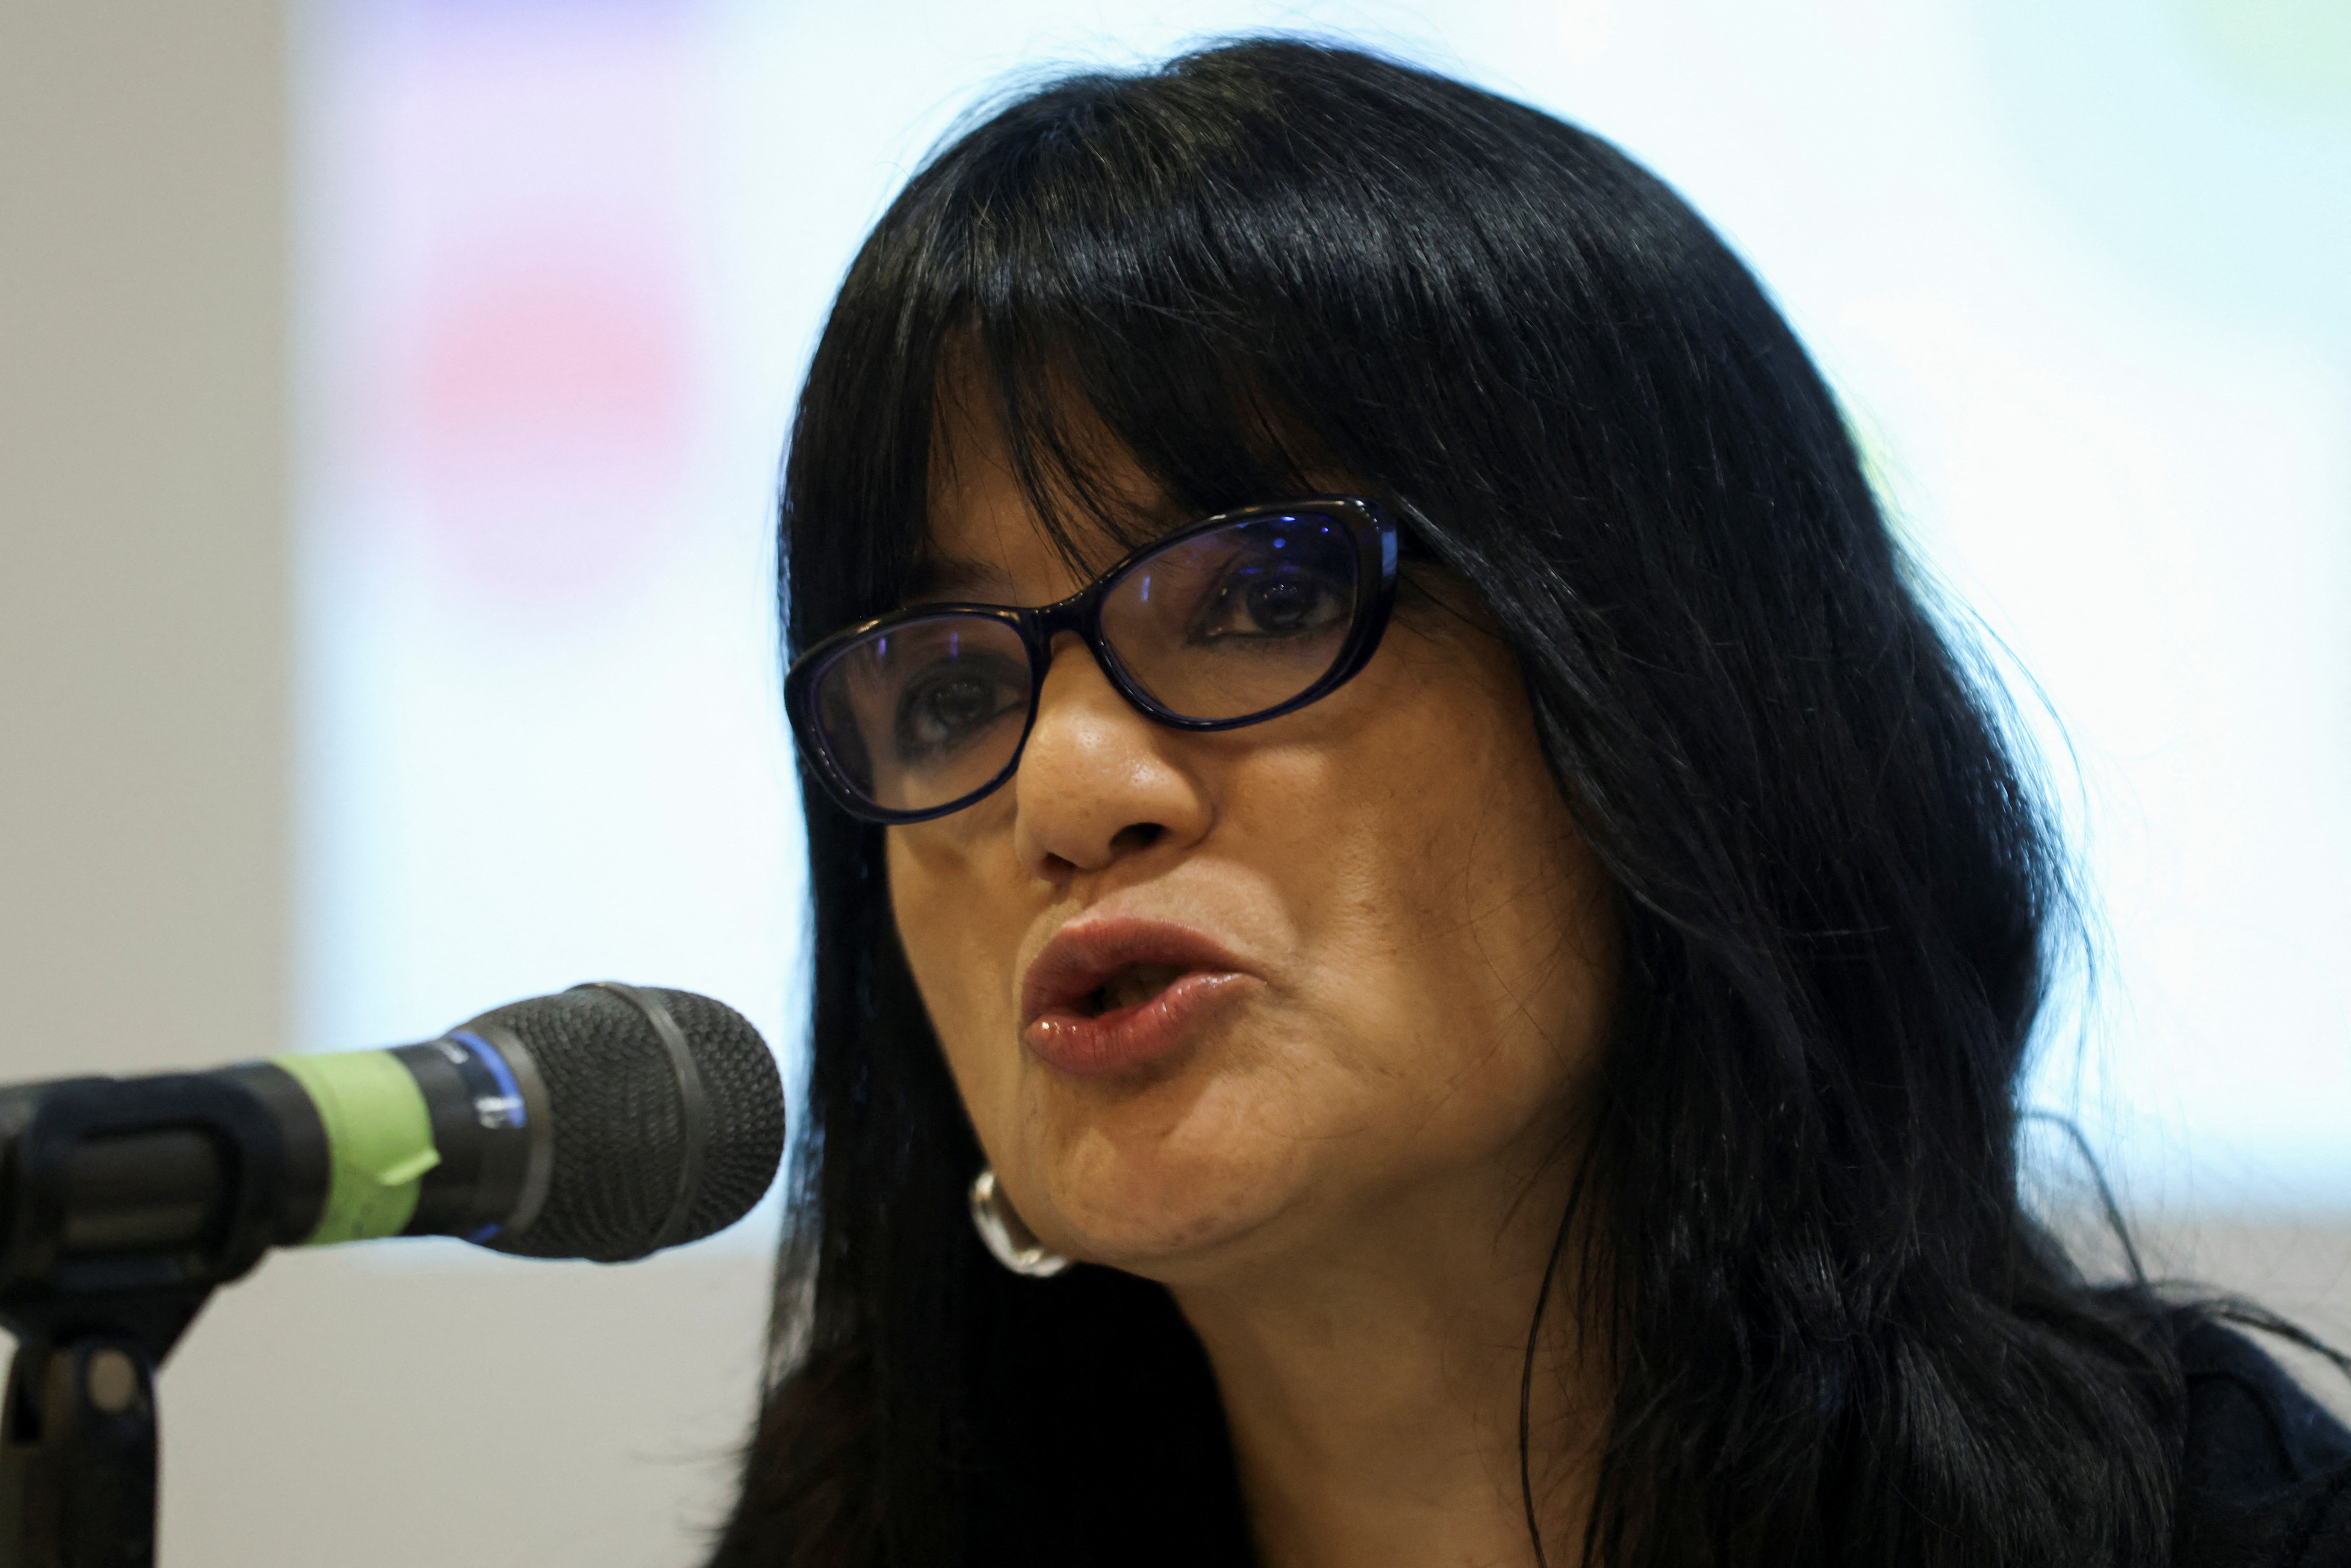 Julissa Mantilla, president of the Inter-American Commission on Human Rights (CIDH), speaks during the presentation of the first report on the follow-up of recommendations, in Bogota